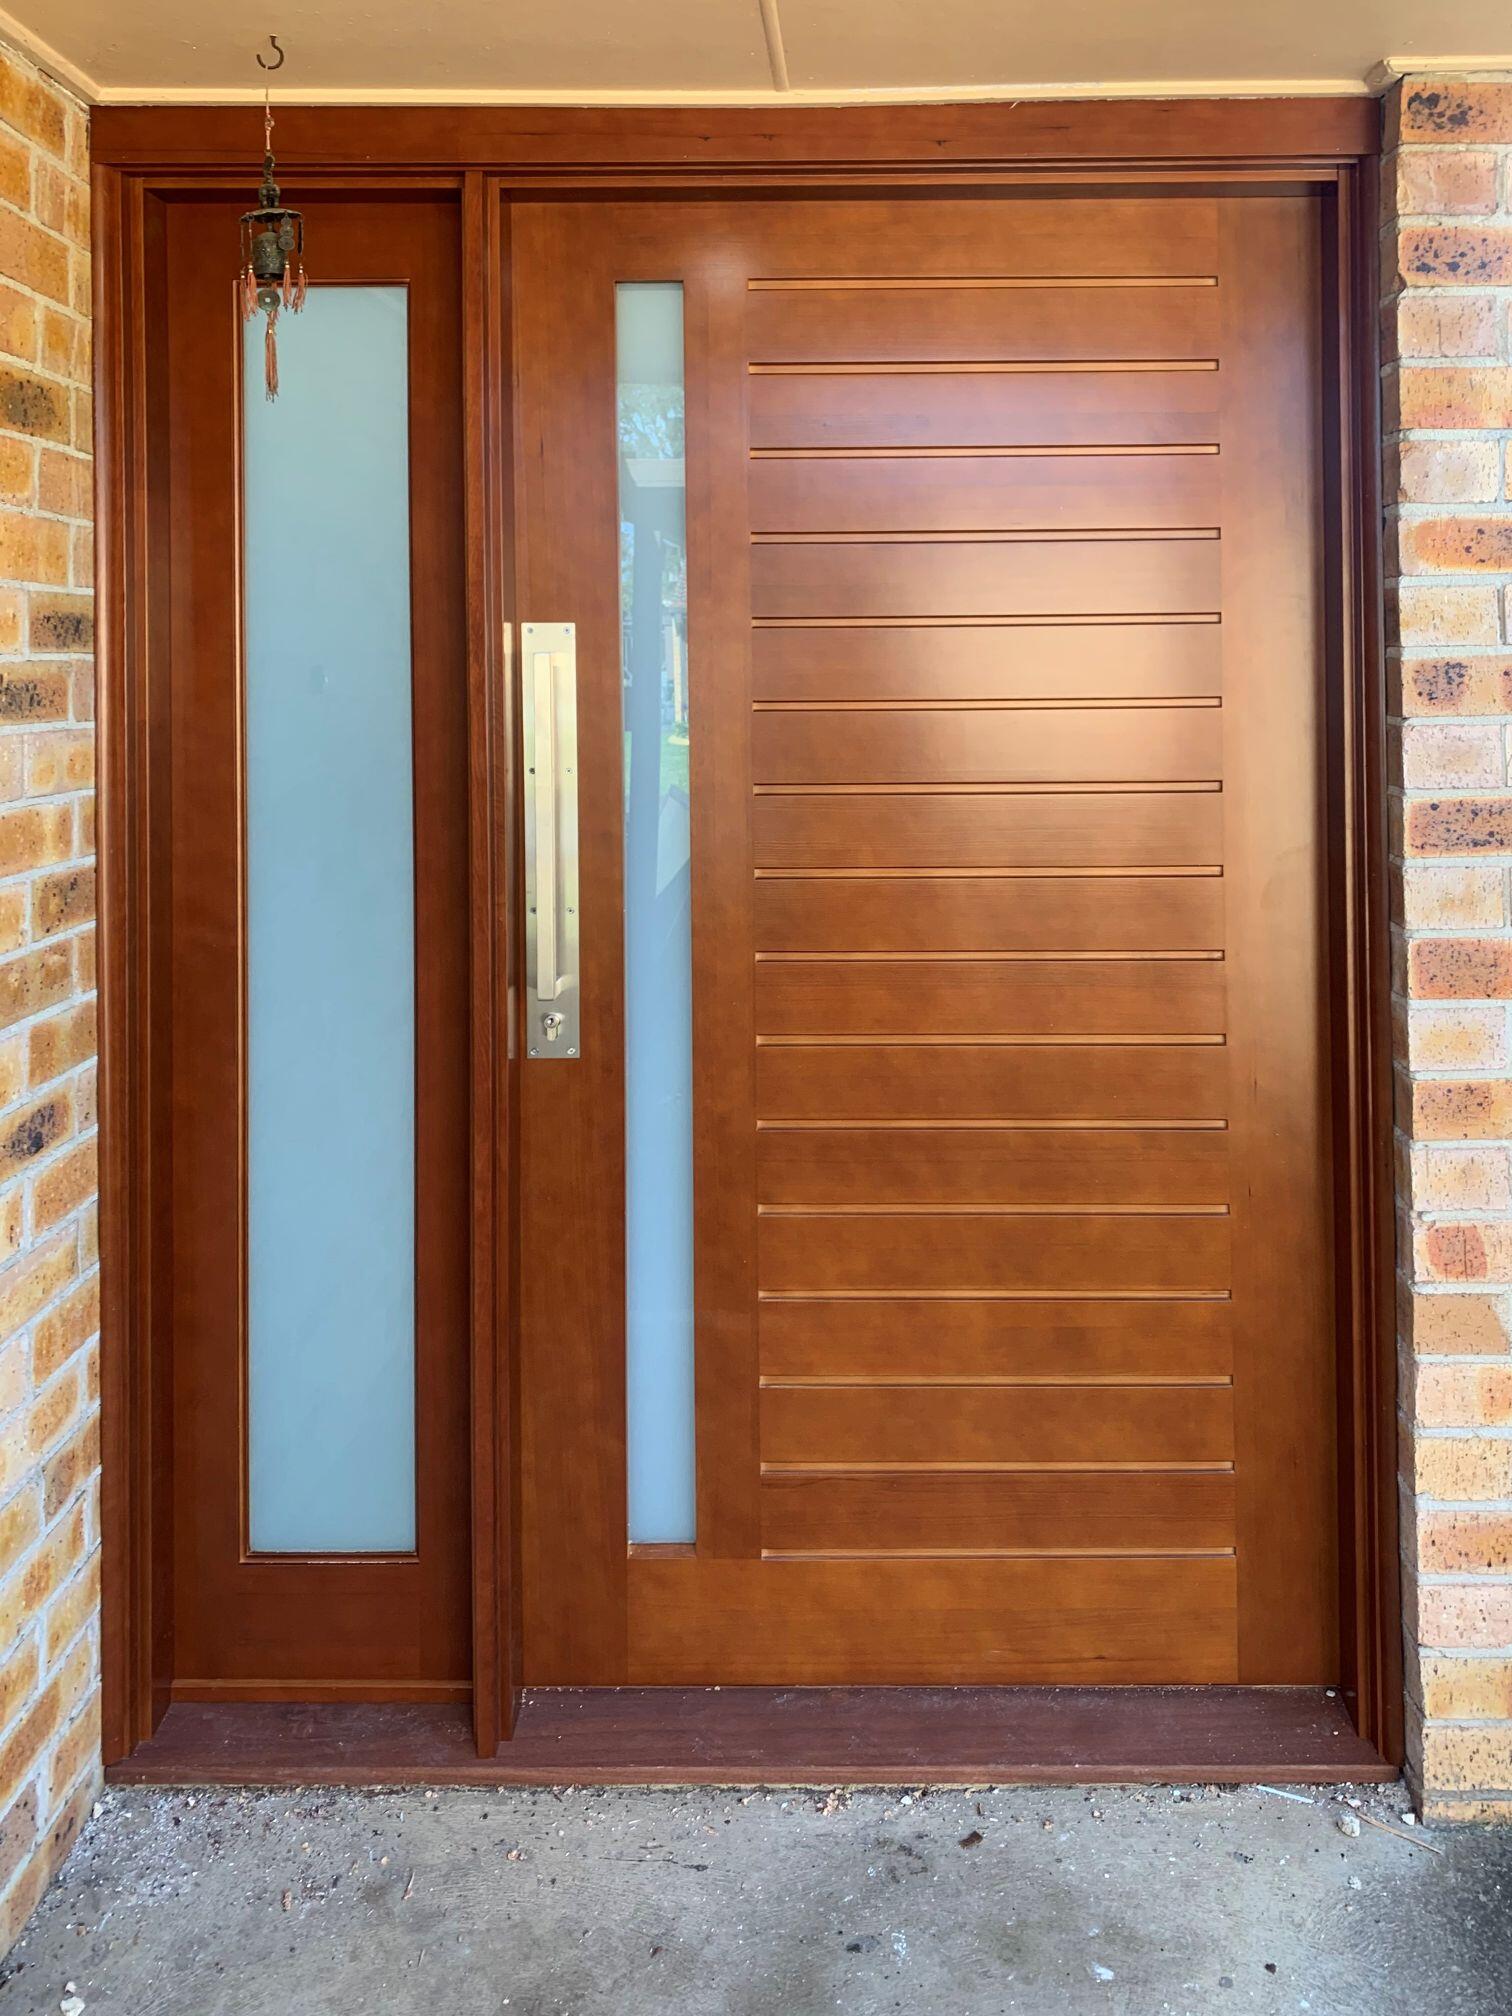 Doors Plus-External-Entry californian door-custom made wide door with side panel-stained in Dark Maple finish-with stainless steel pull handle